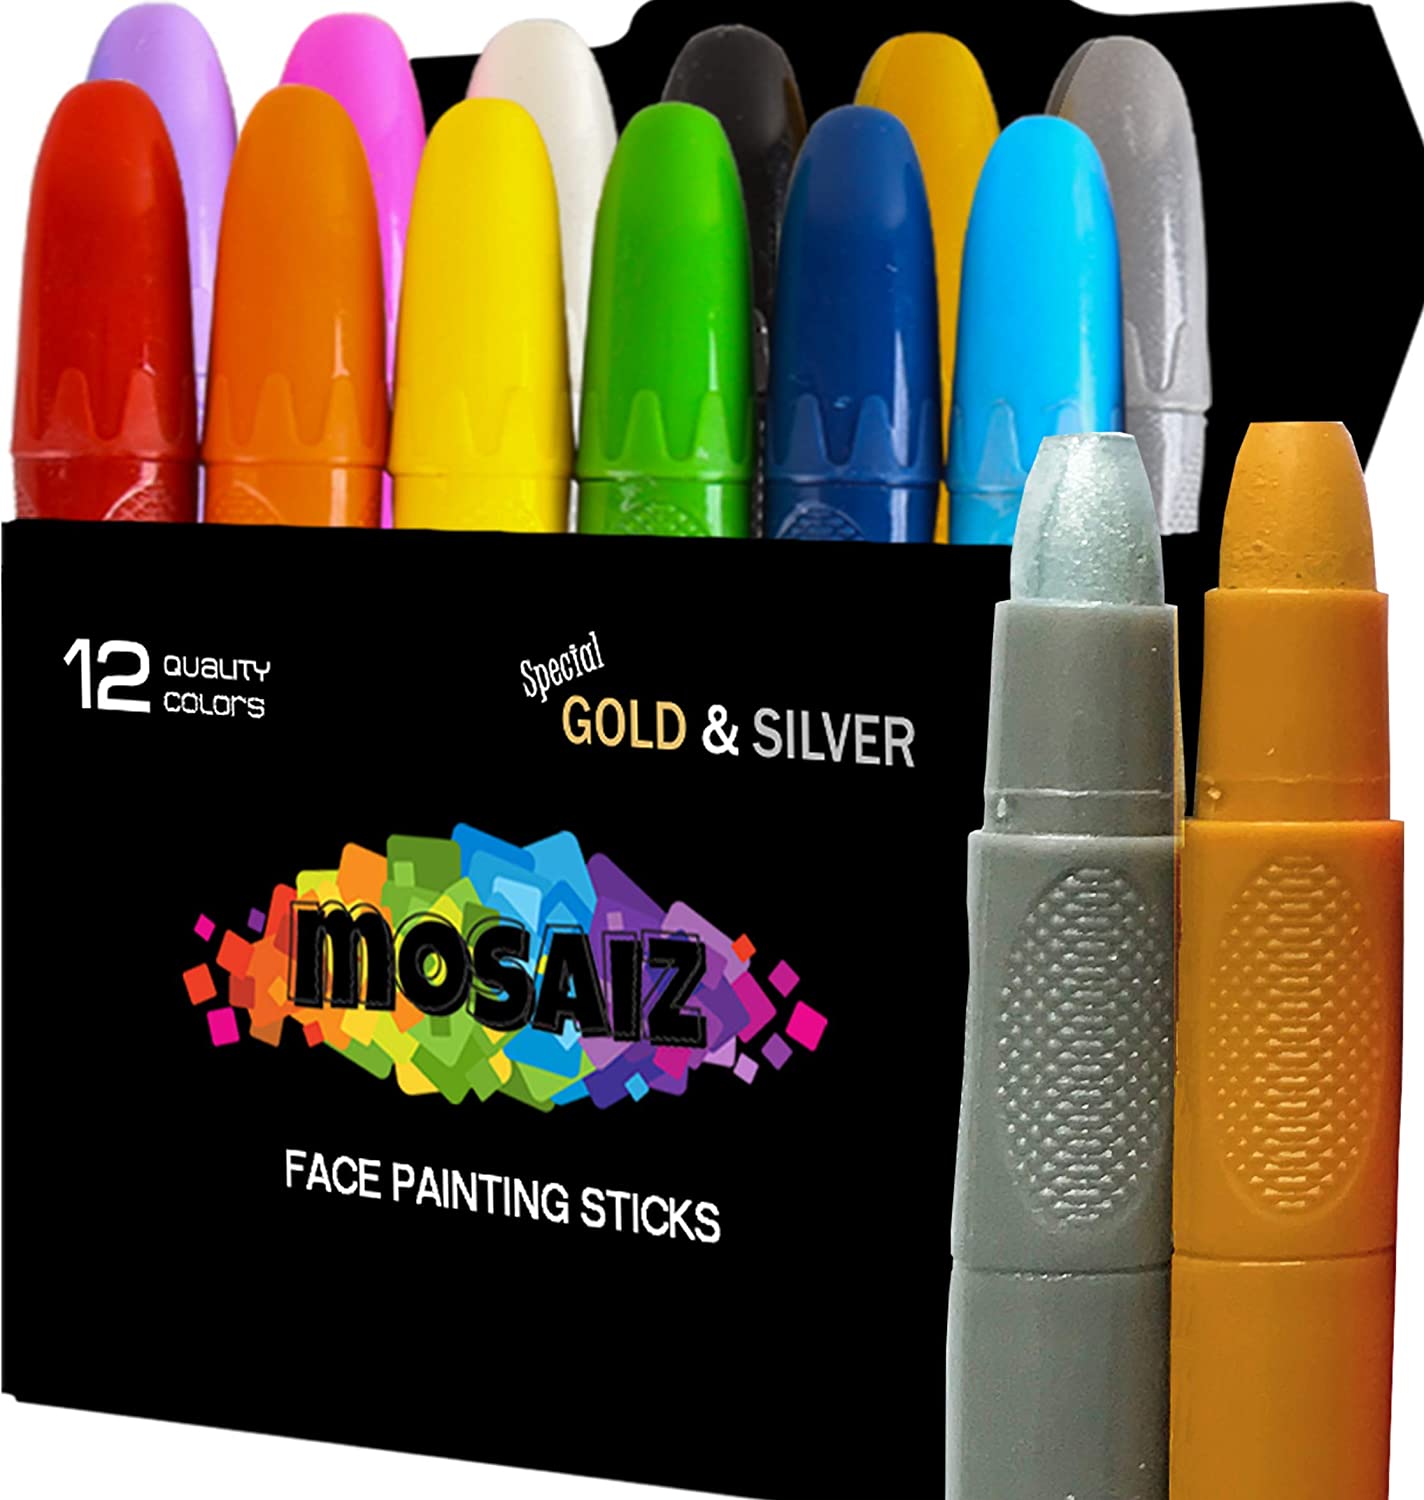 Mosaiz Face Painting Kits for Kids